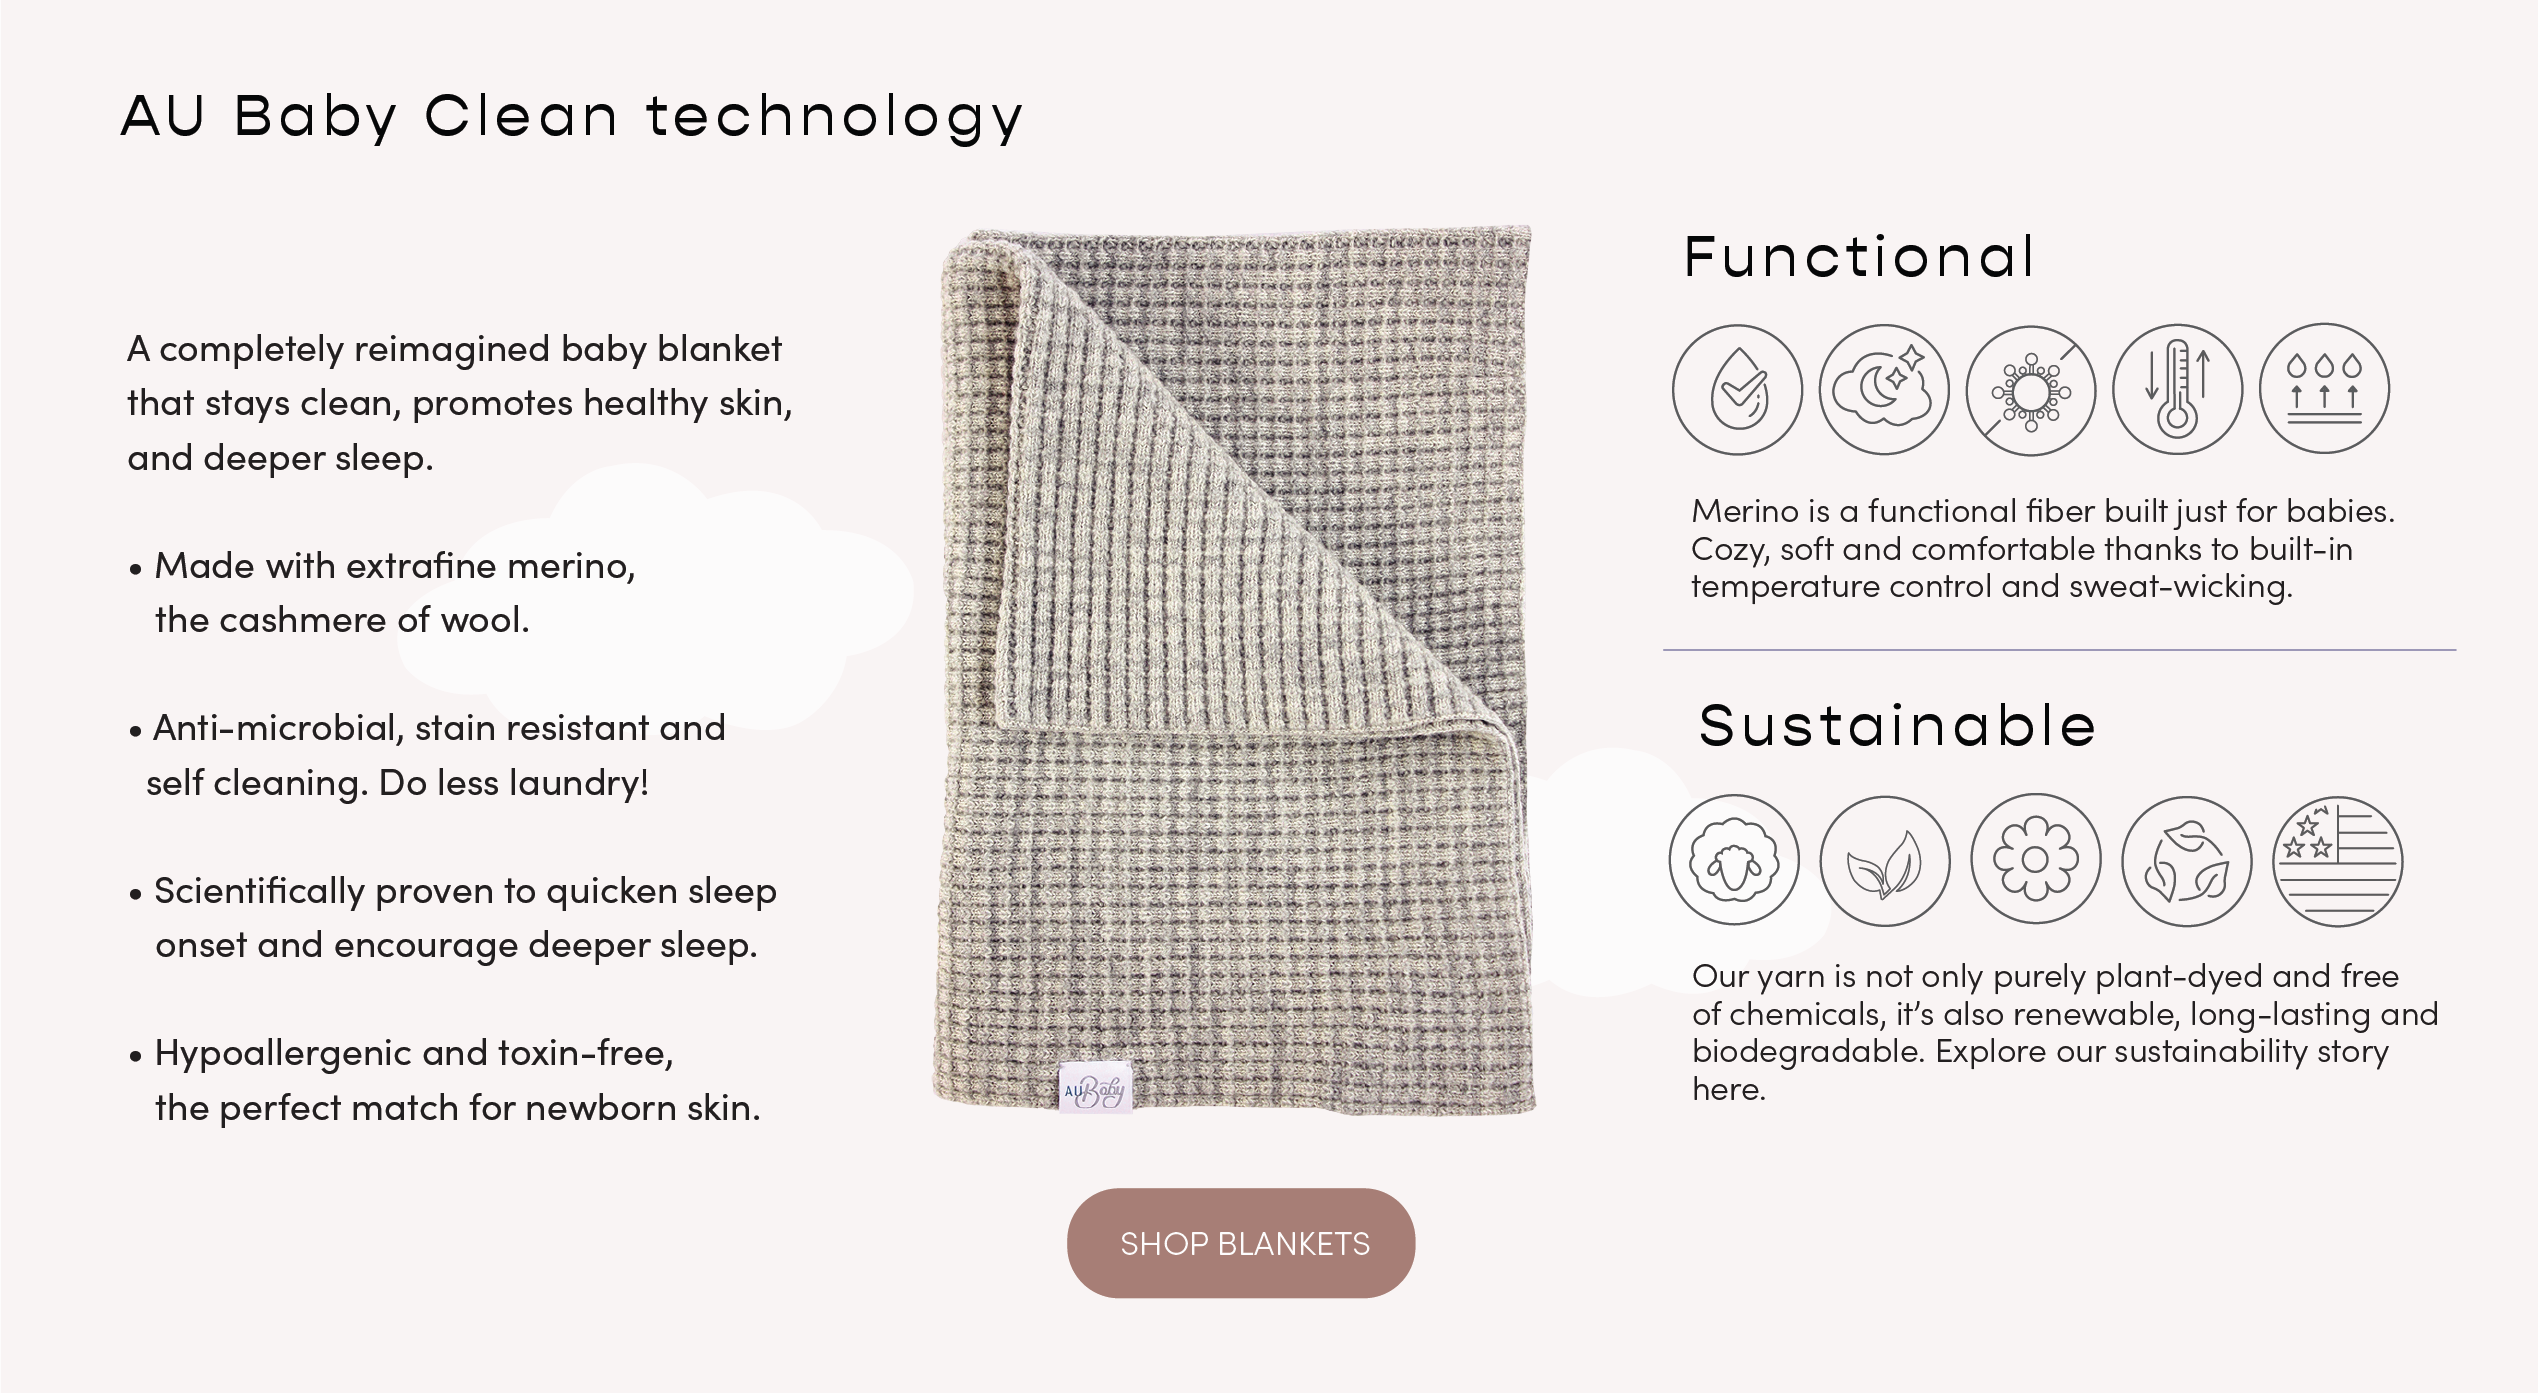 AU Baby merino blanket benefits. Natural, non-toxic, sustainable baby blanket collection.